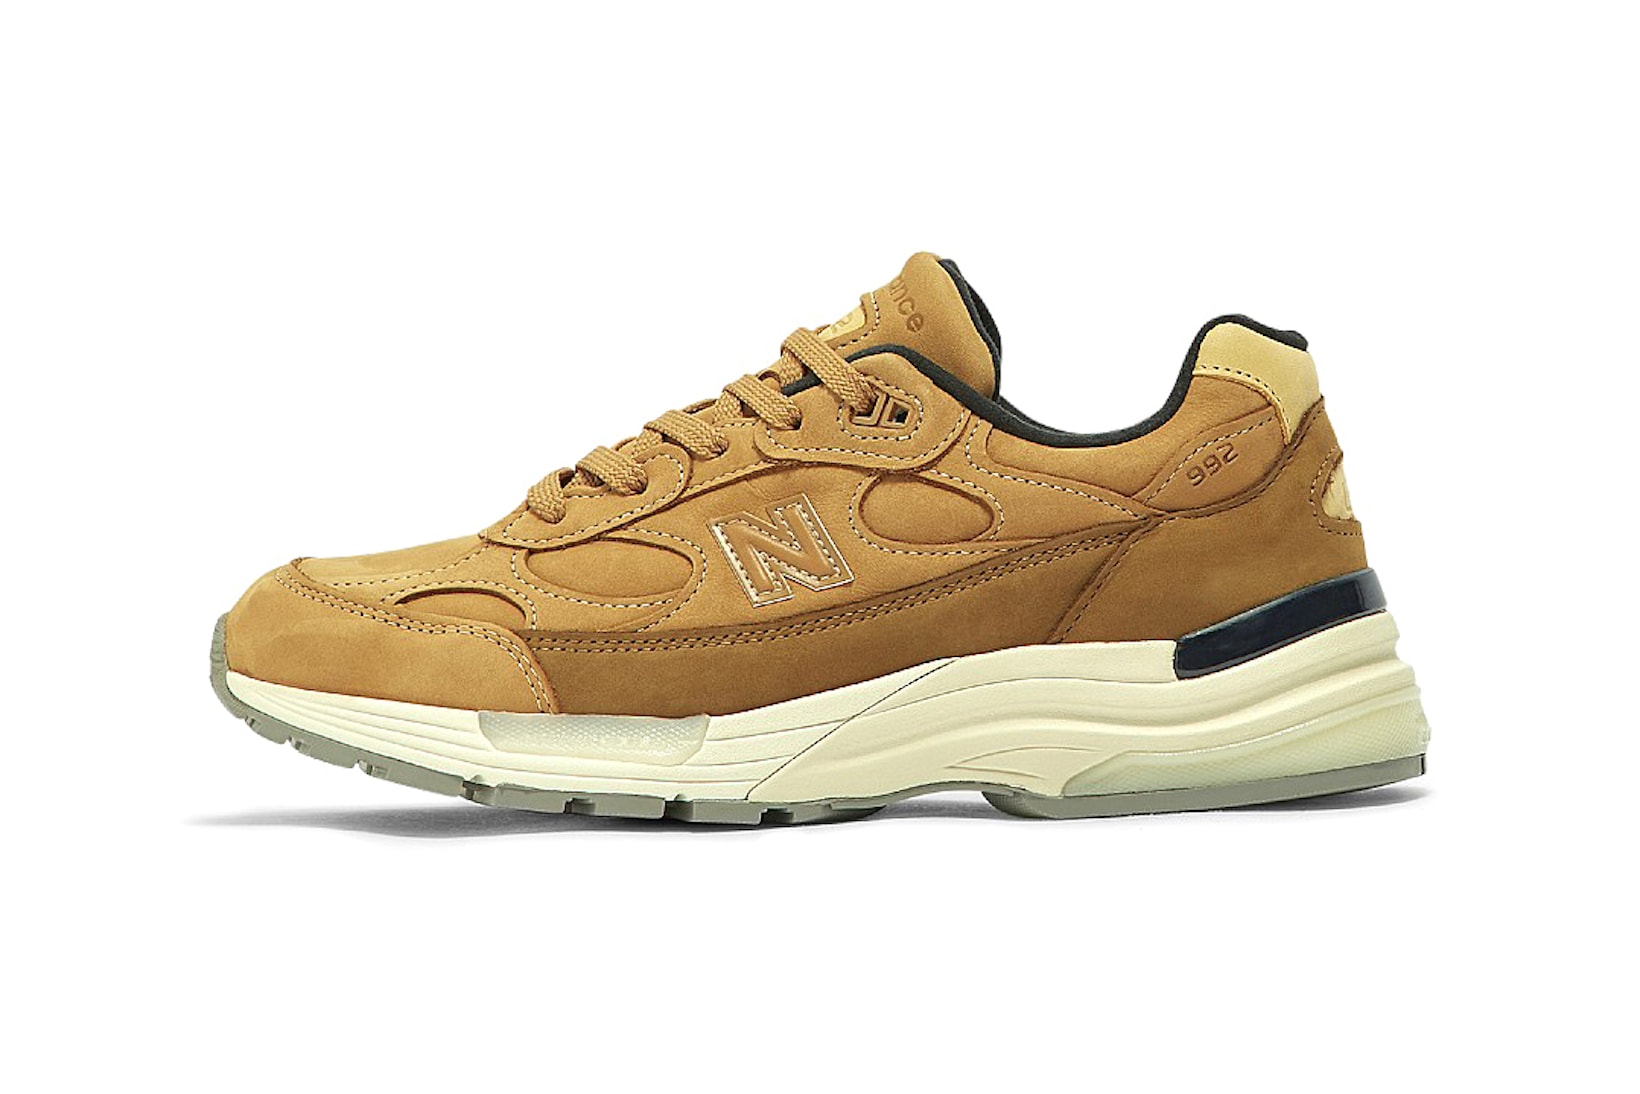 new balance 992 gold brown white sneakers footwear shoes kicks sneakerhead lateral